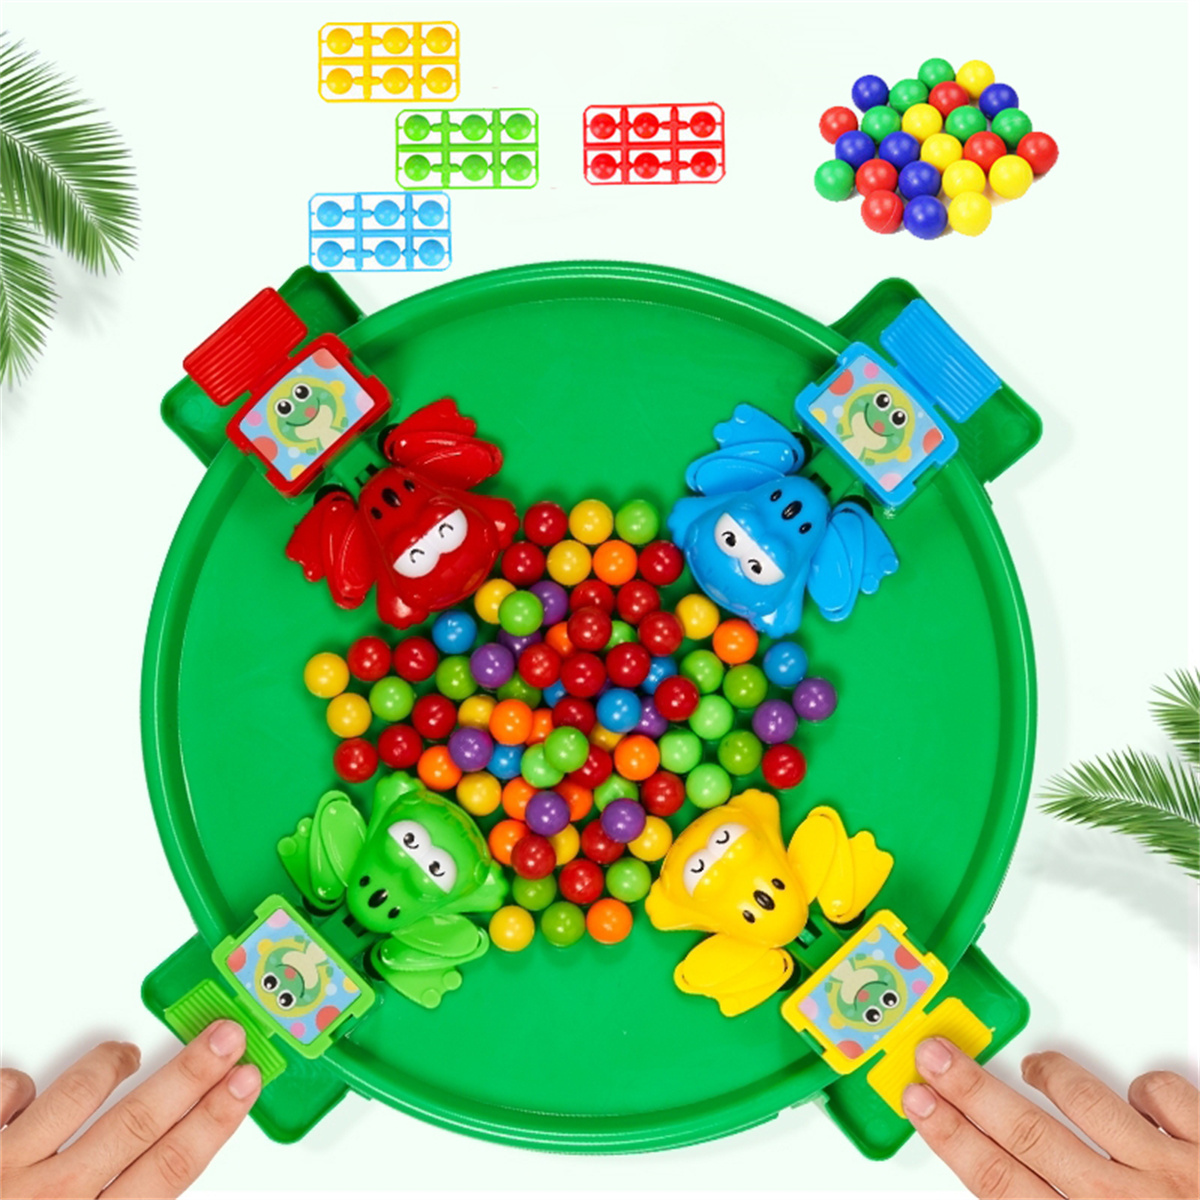 Fun Hungry Frog Pacman Strategy Game for Family Gathering, Kids & Adults